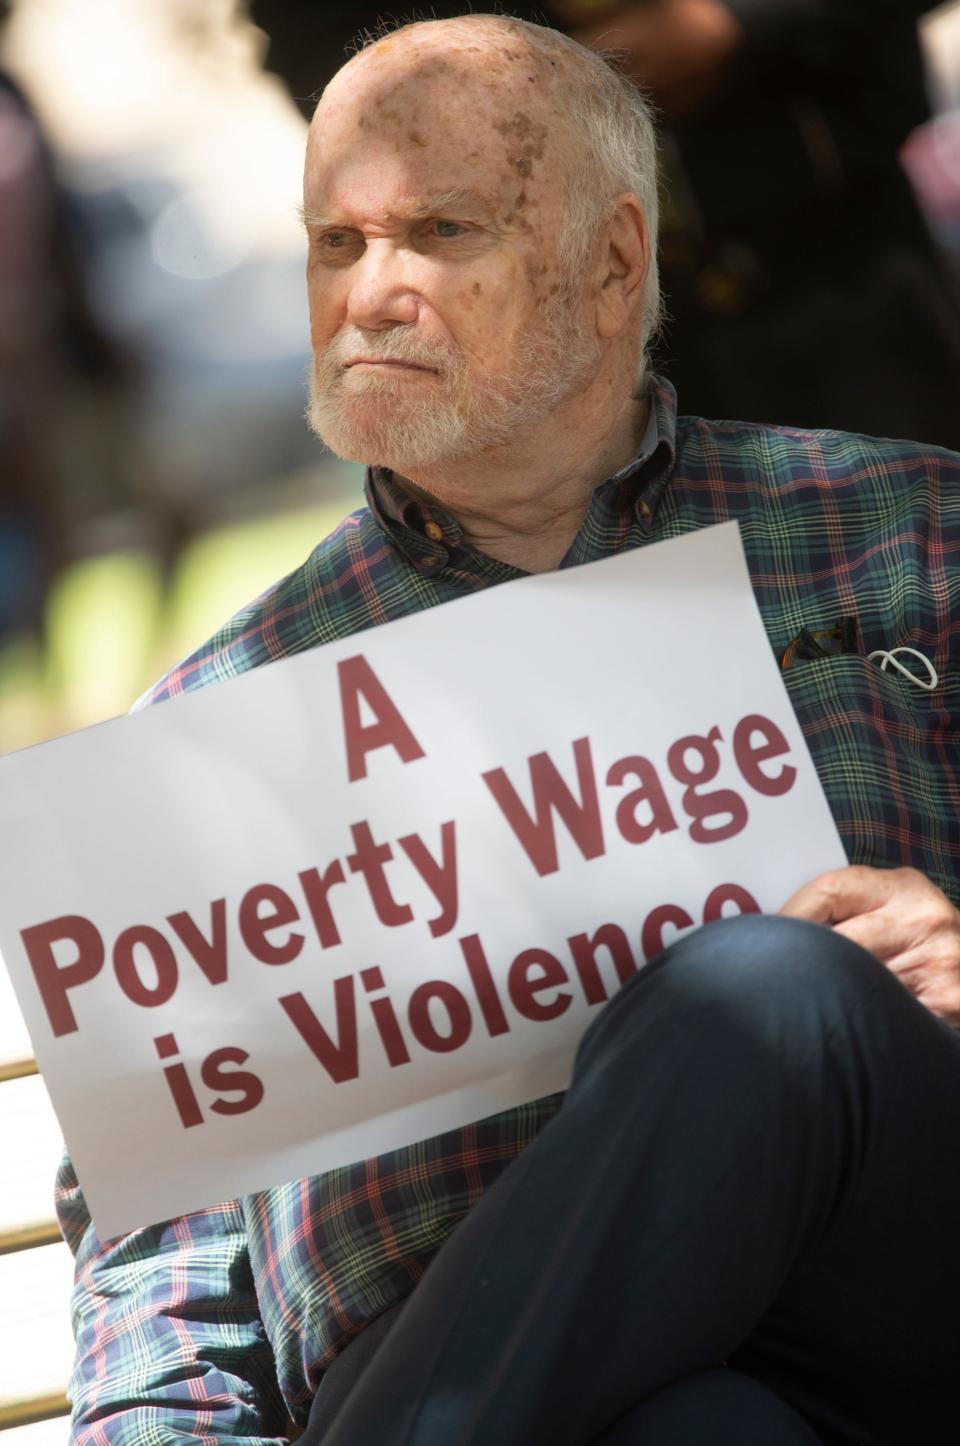 Charles Hooker, of Jackson, Miss., listens to speakers during the Poor People's Campaign: A National Call for Moral Revival rally in Jackson, Miss., in 2021.